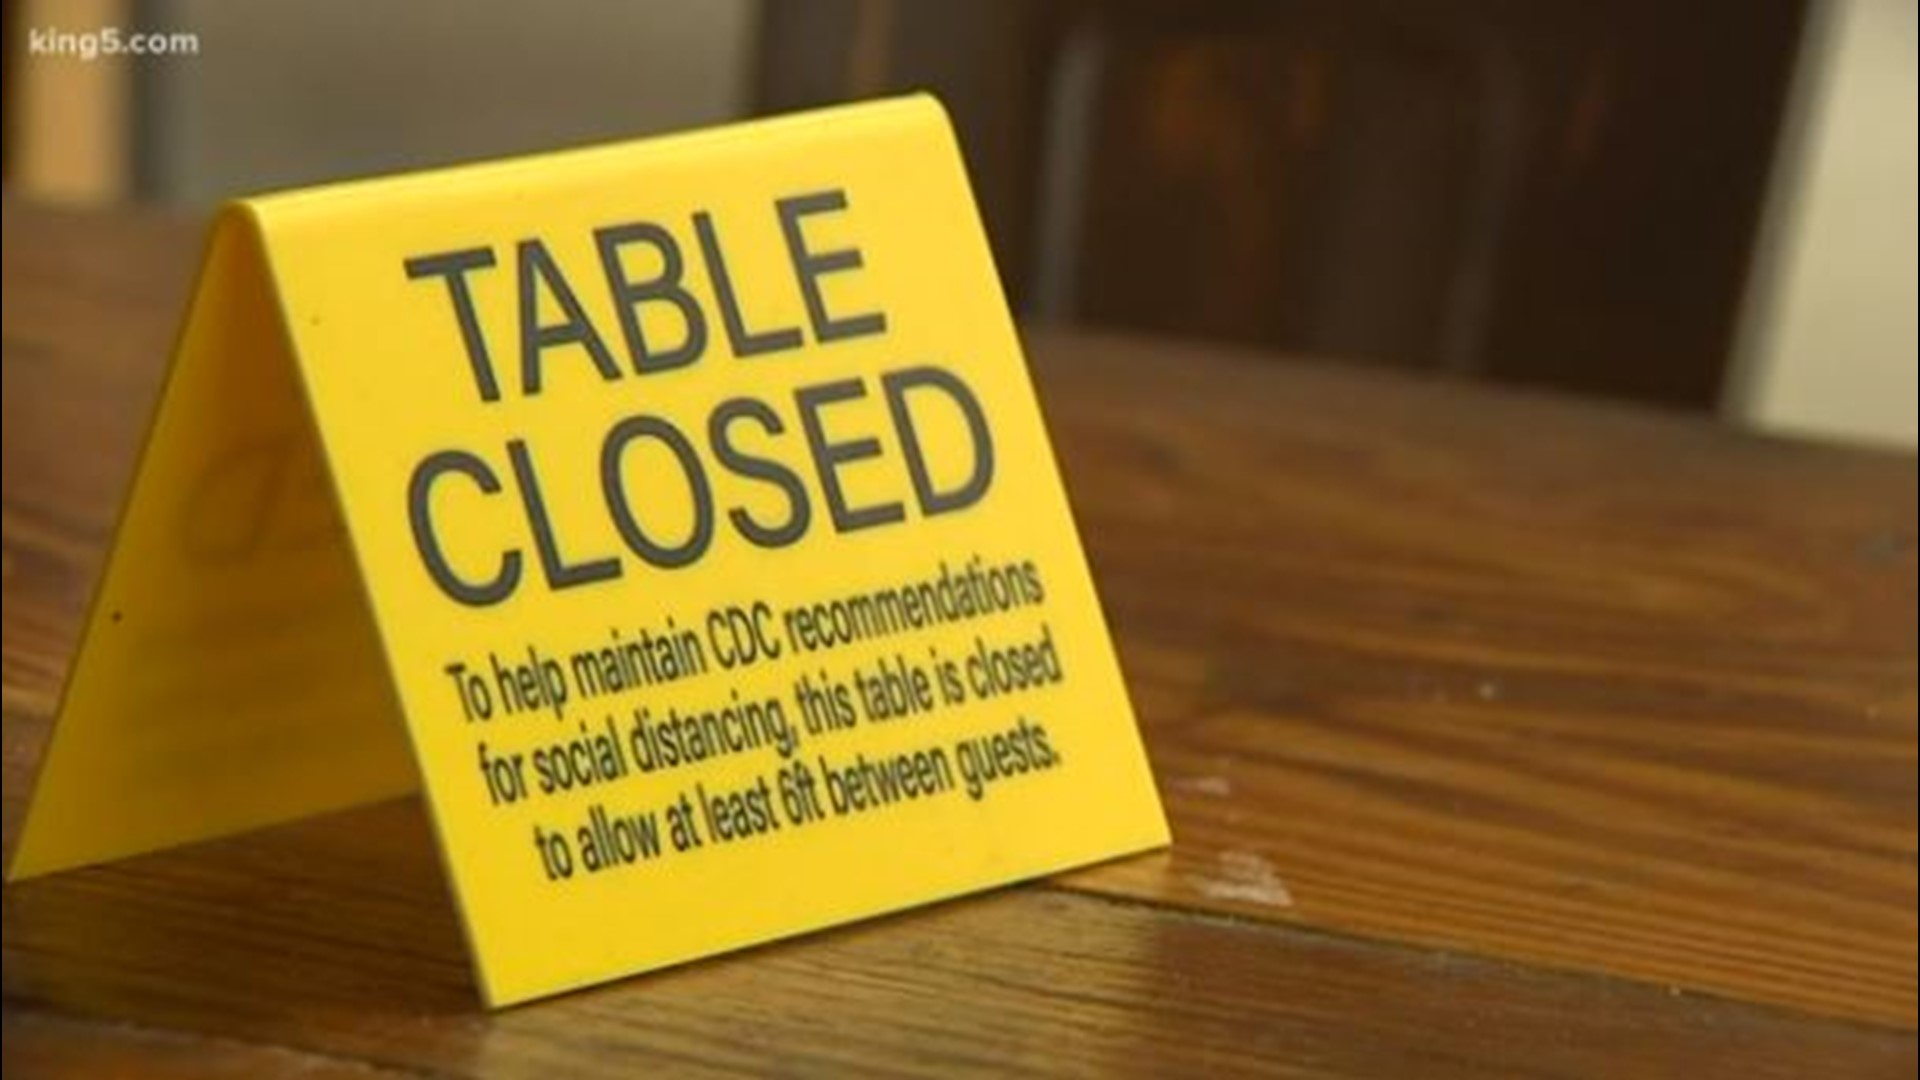 Restaurants that are open in Seattle want to keep guests safe while also recouping some of the money they've lost during the lockdown.